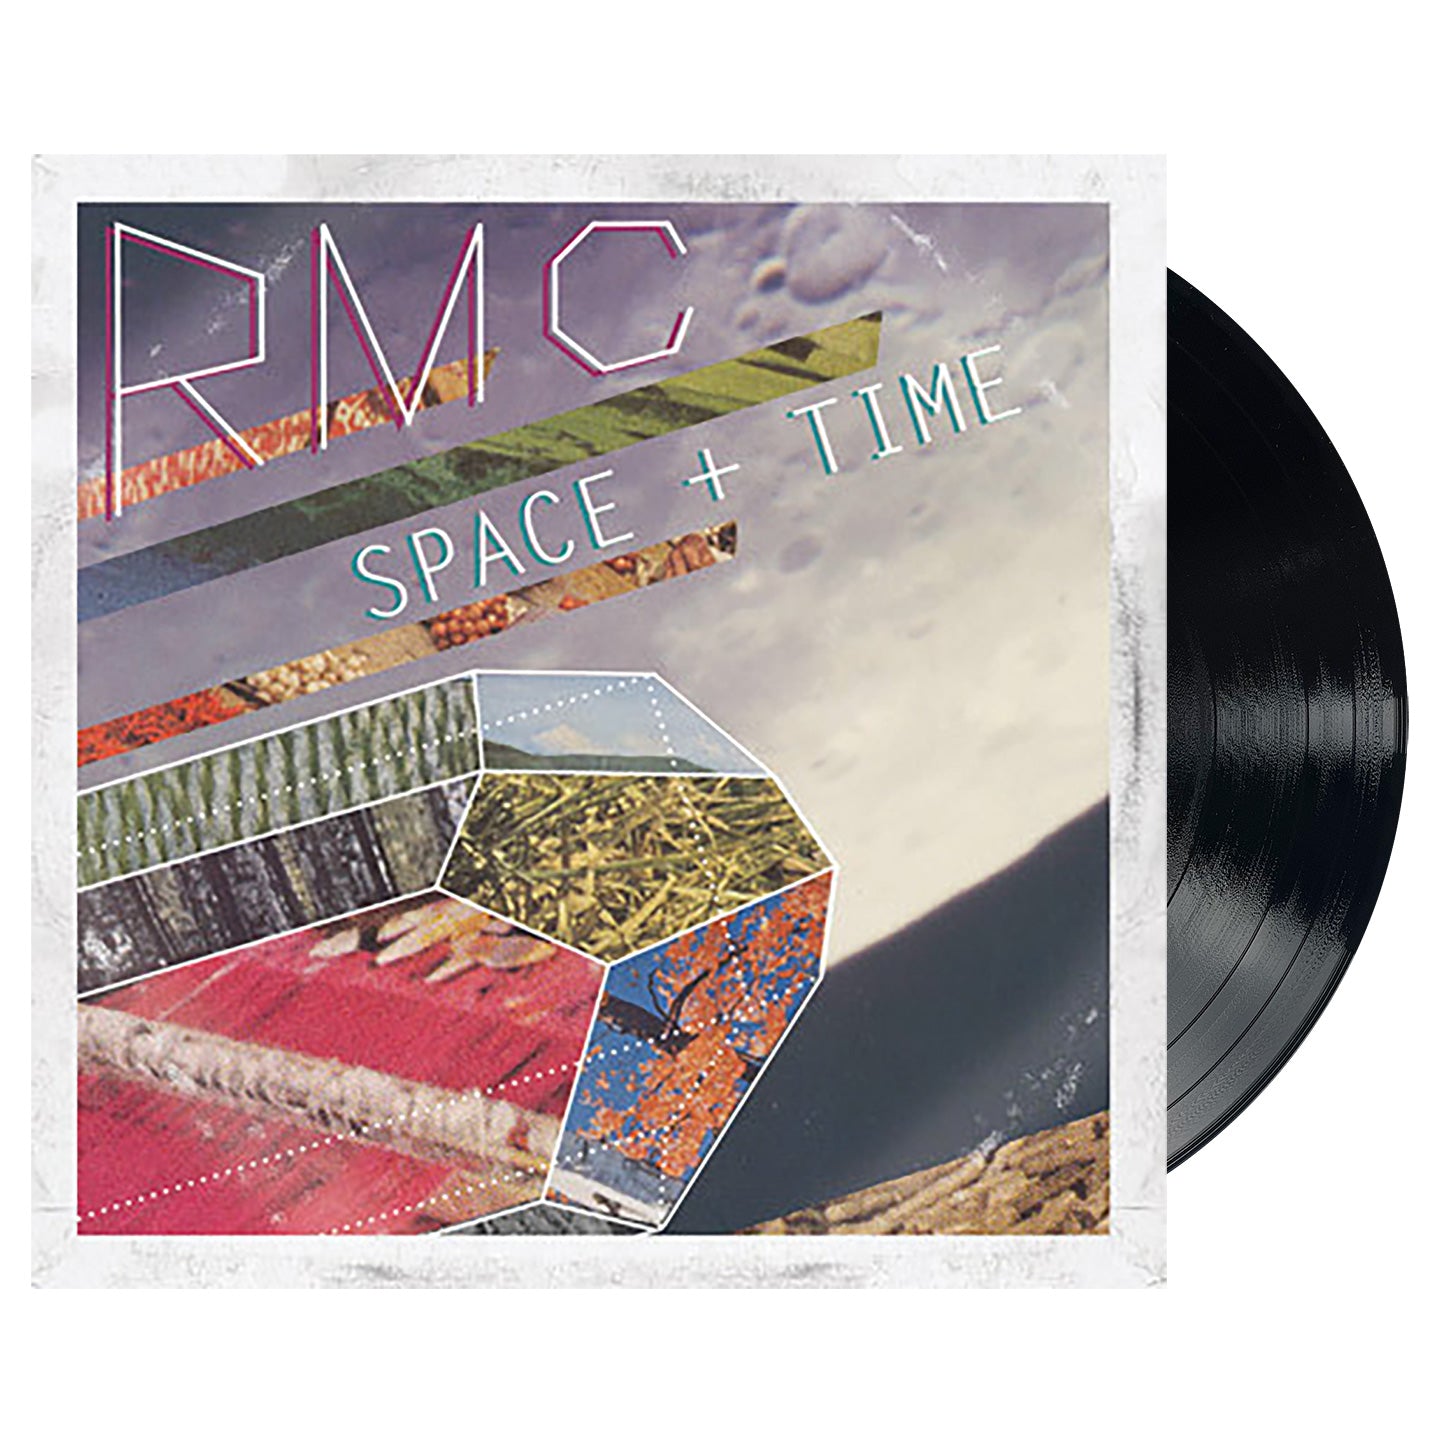 R.M.C. - Space & Time